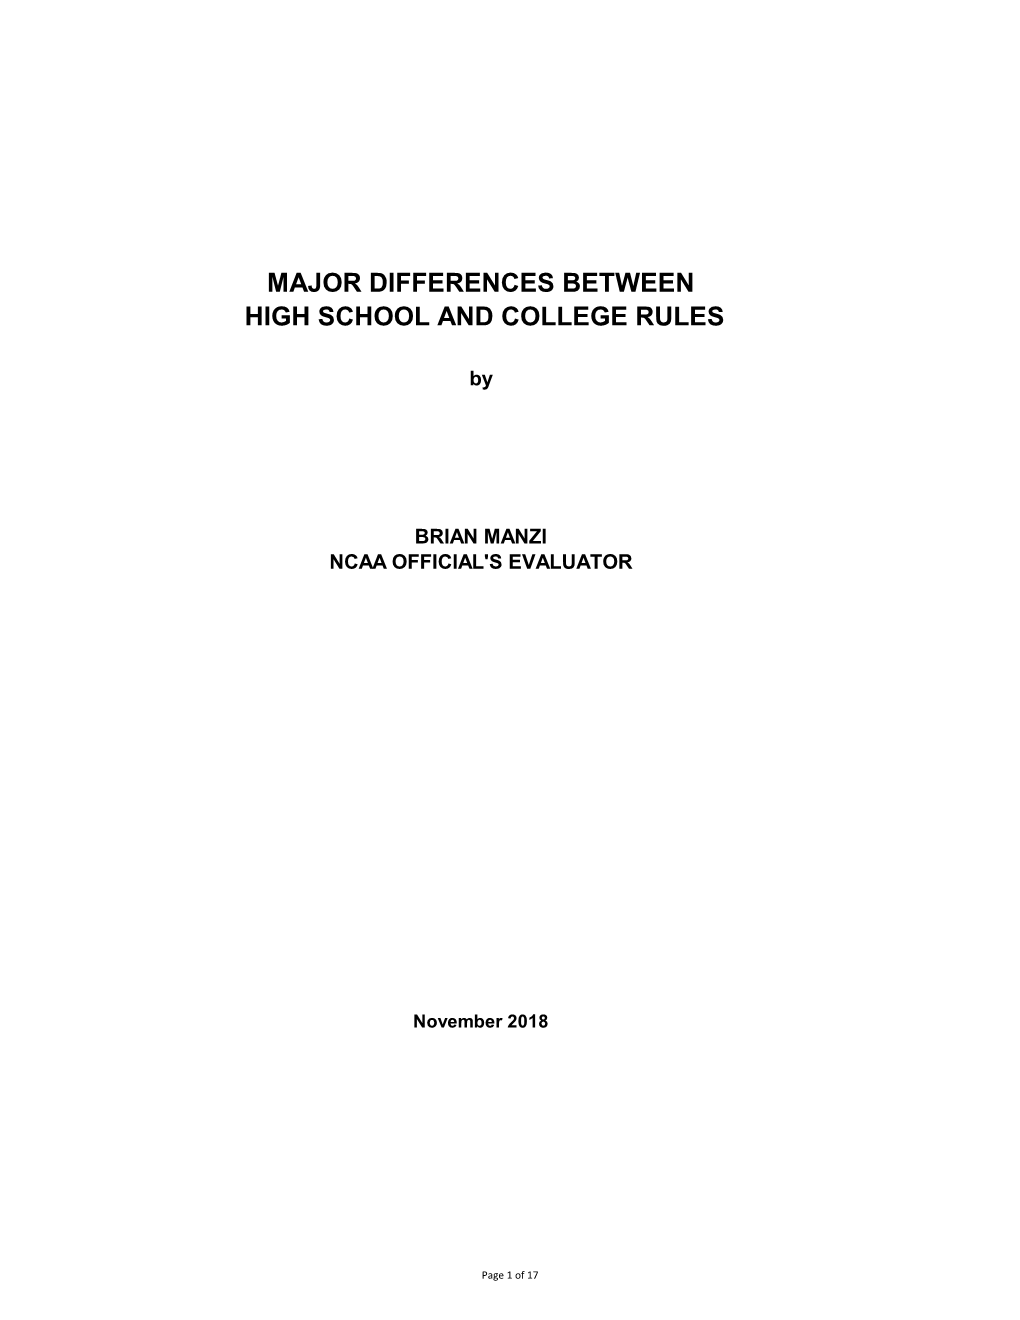 Major Differences Between High School and College Rules